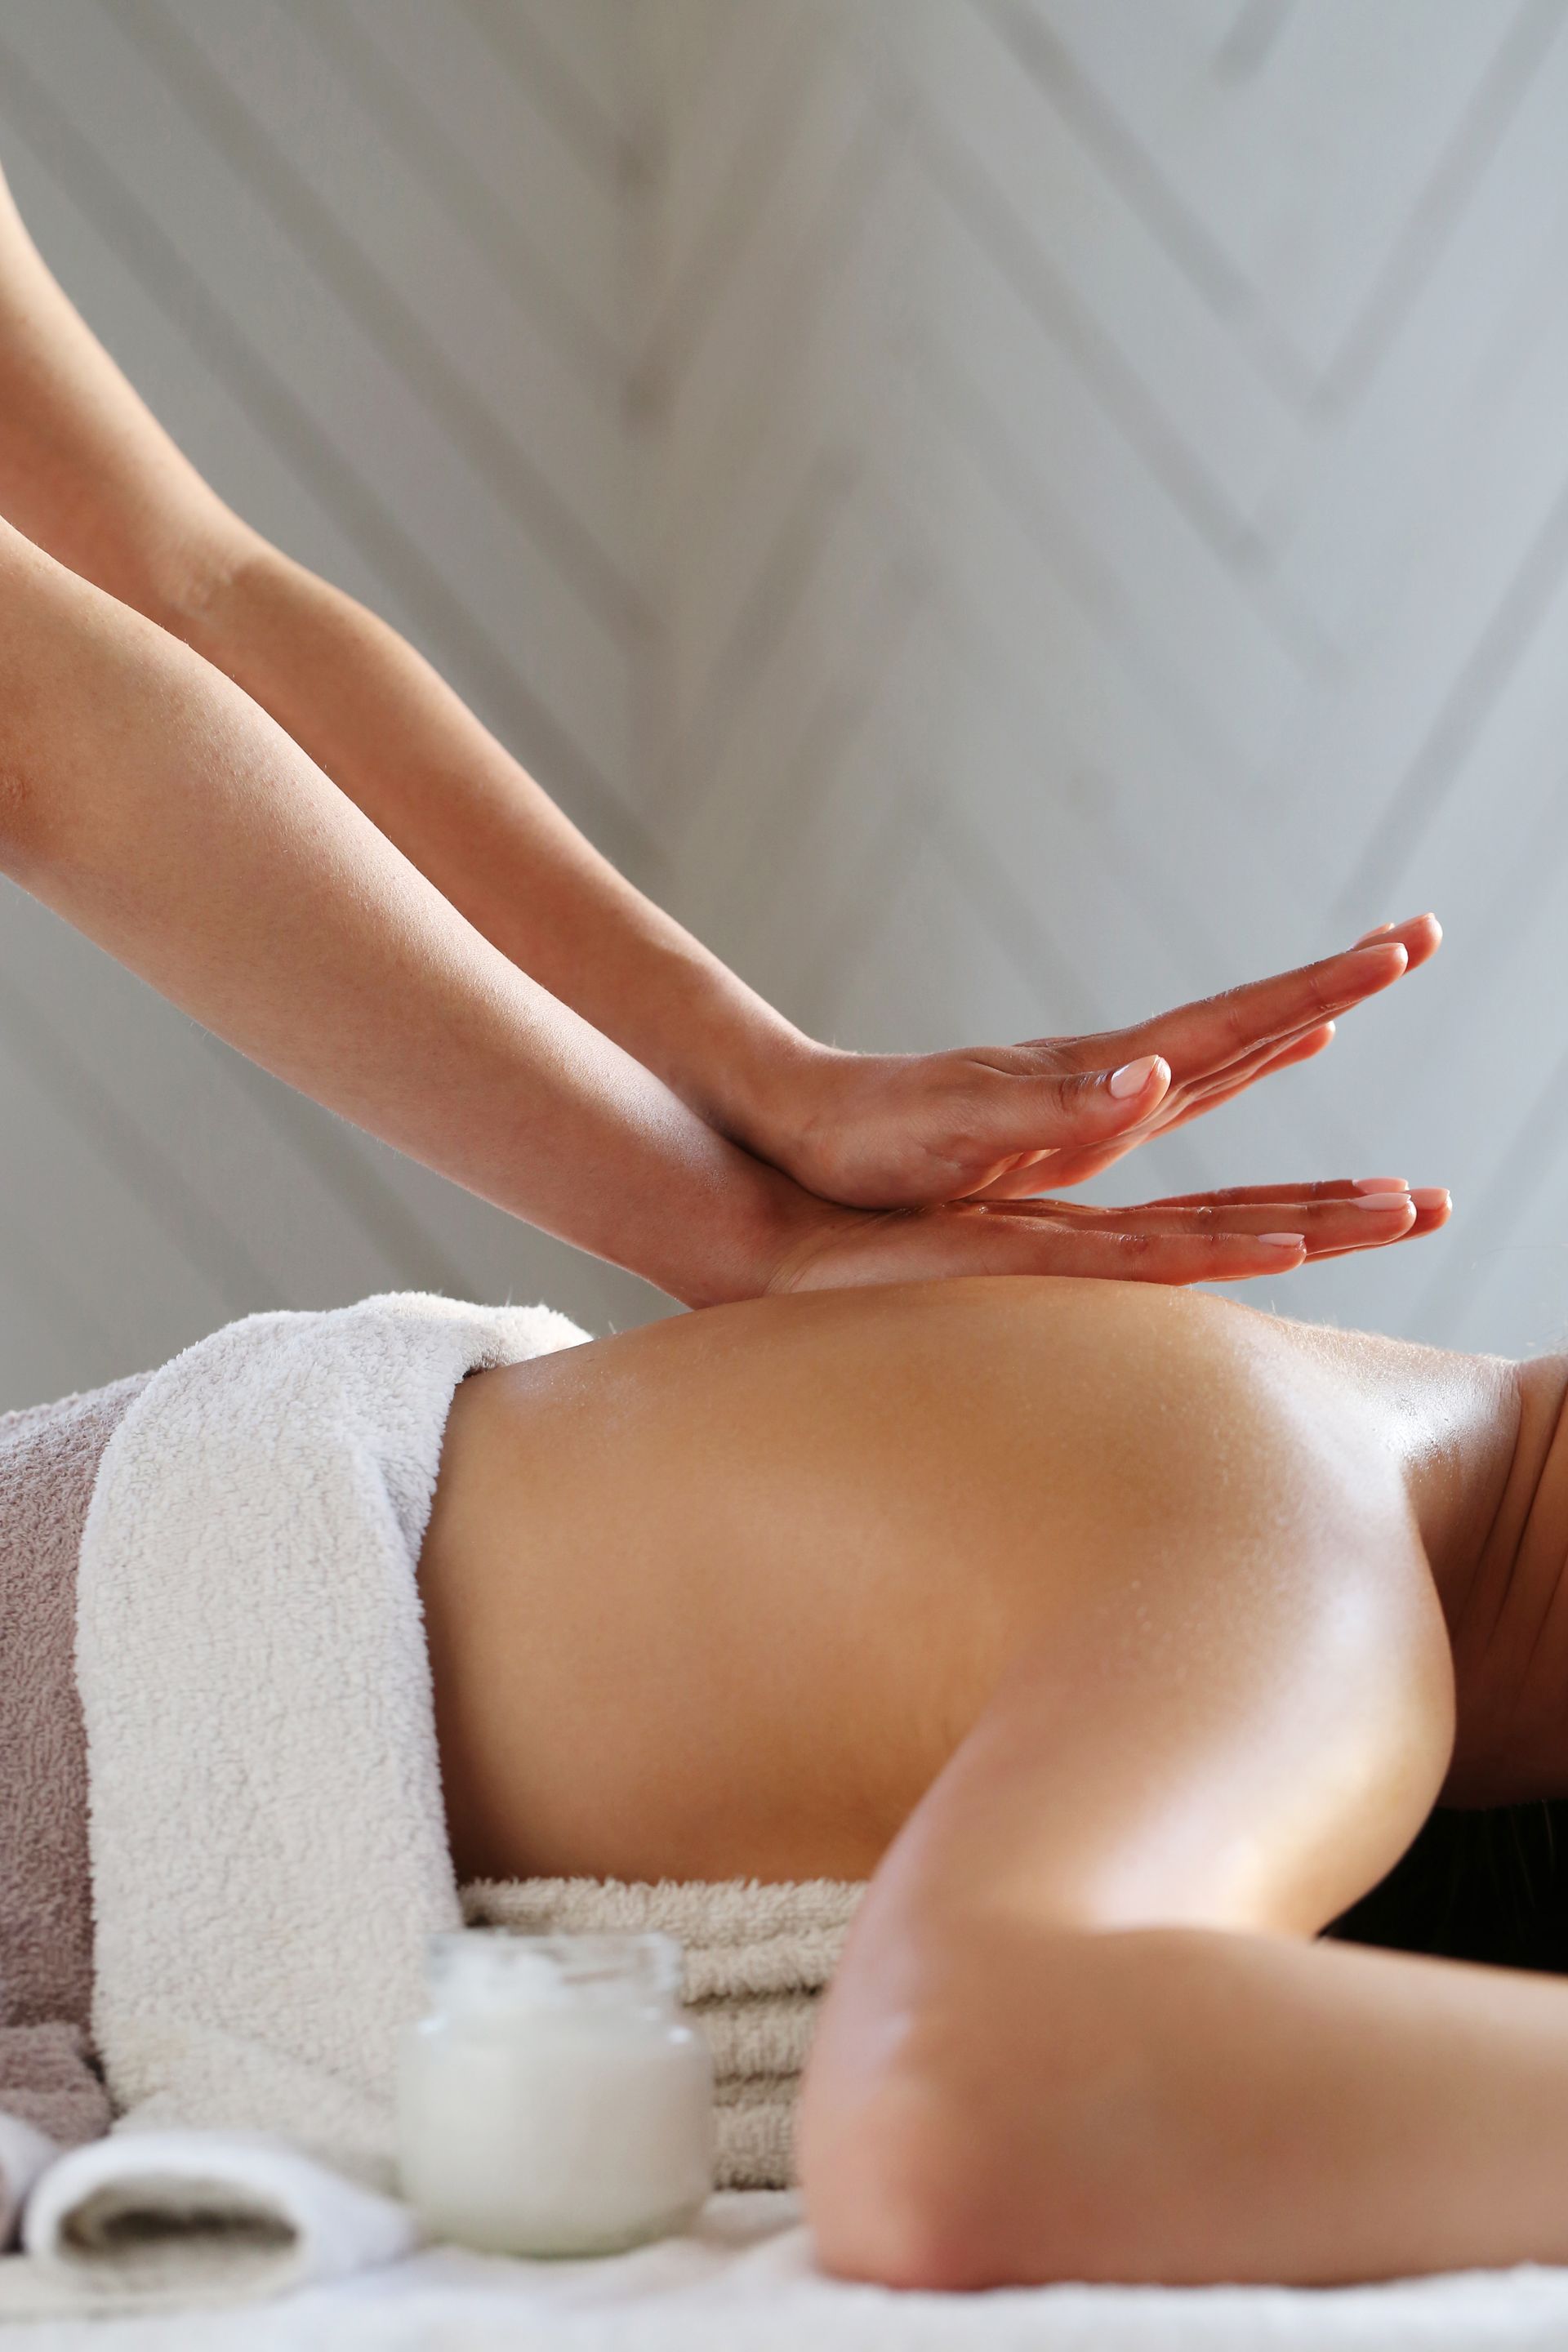 A woman is getting a massage at a spa.